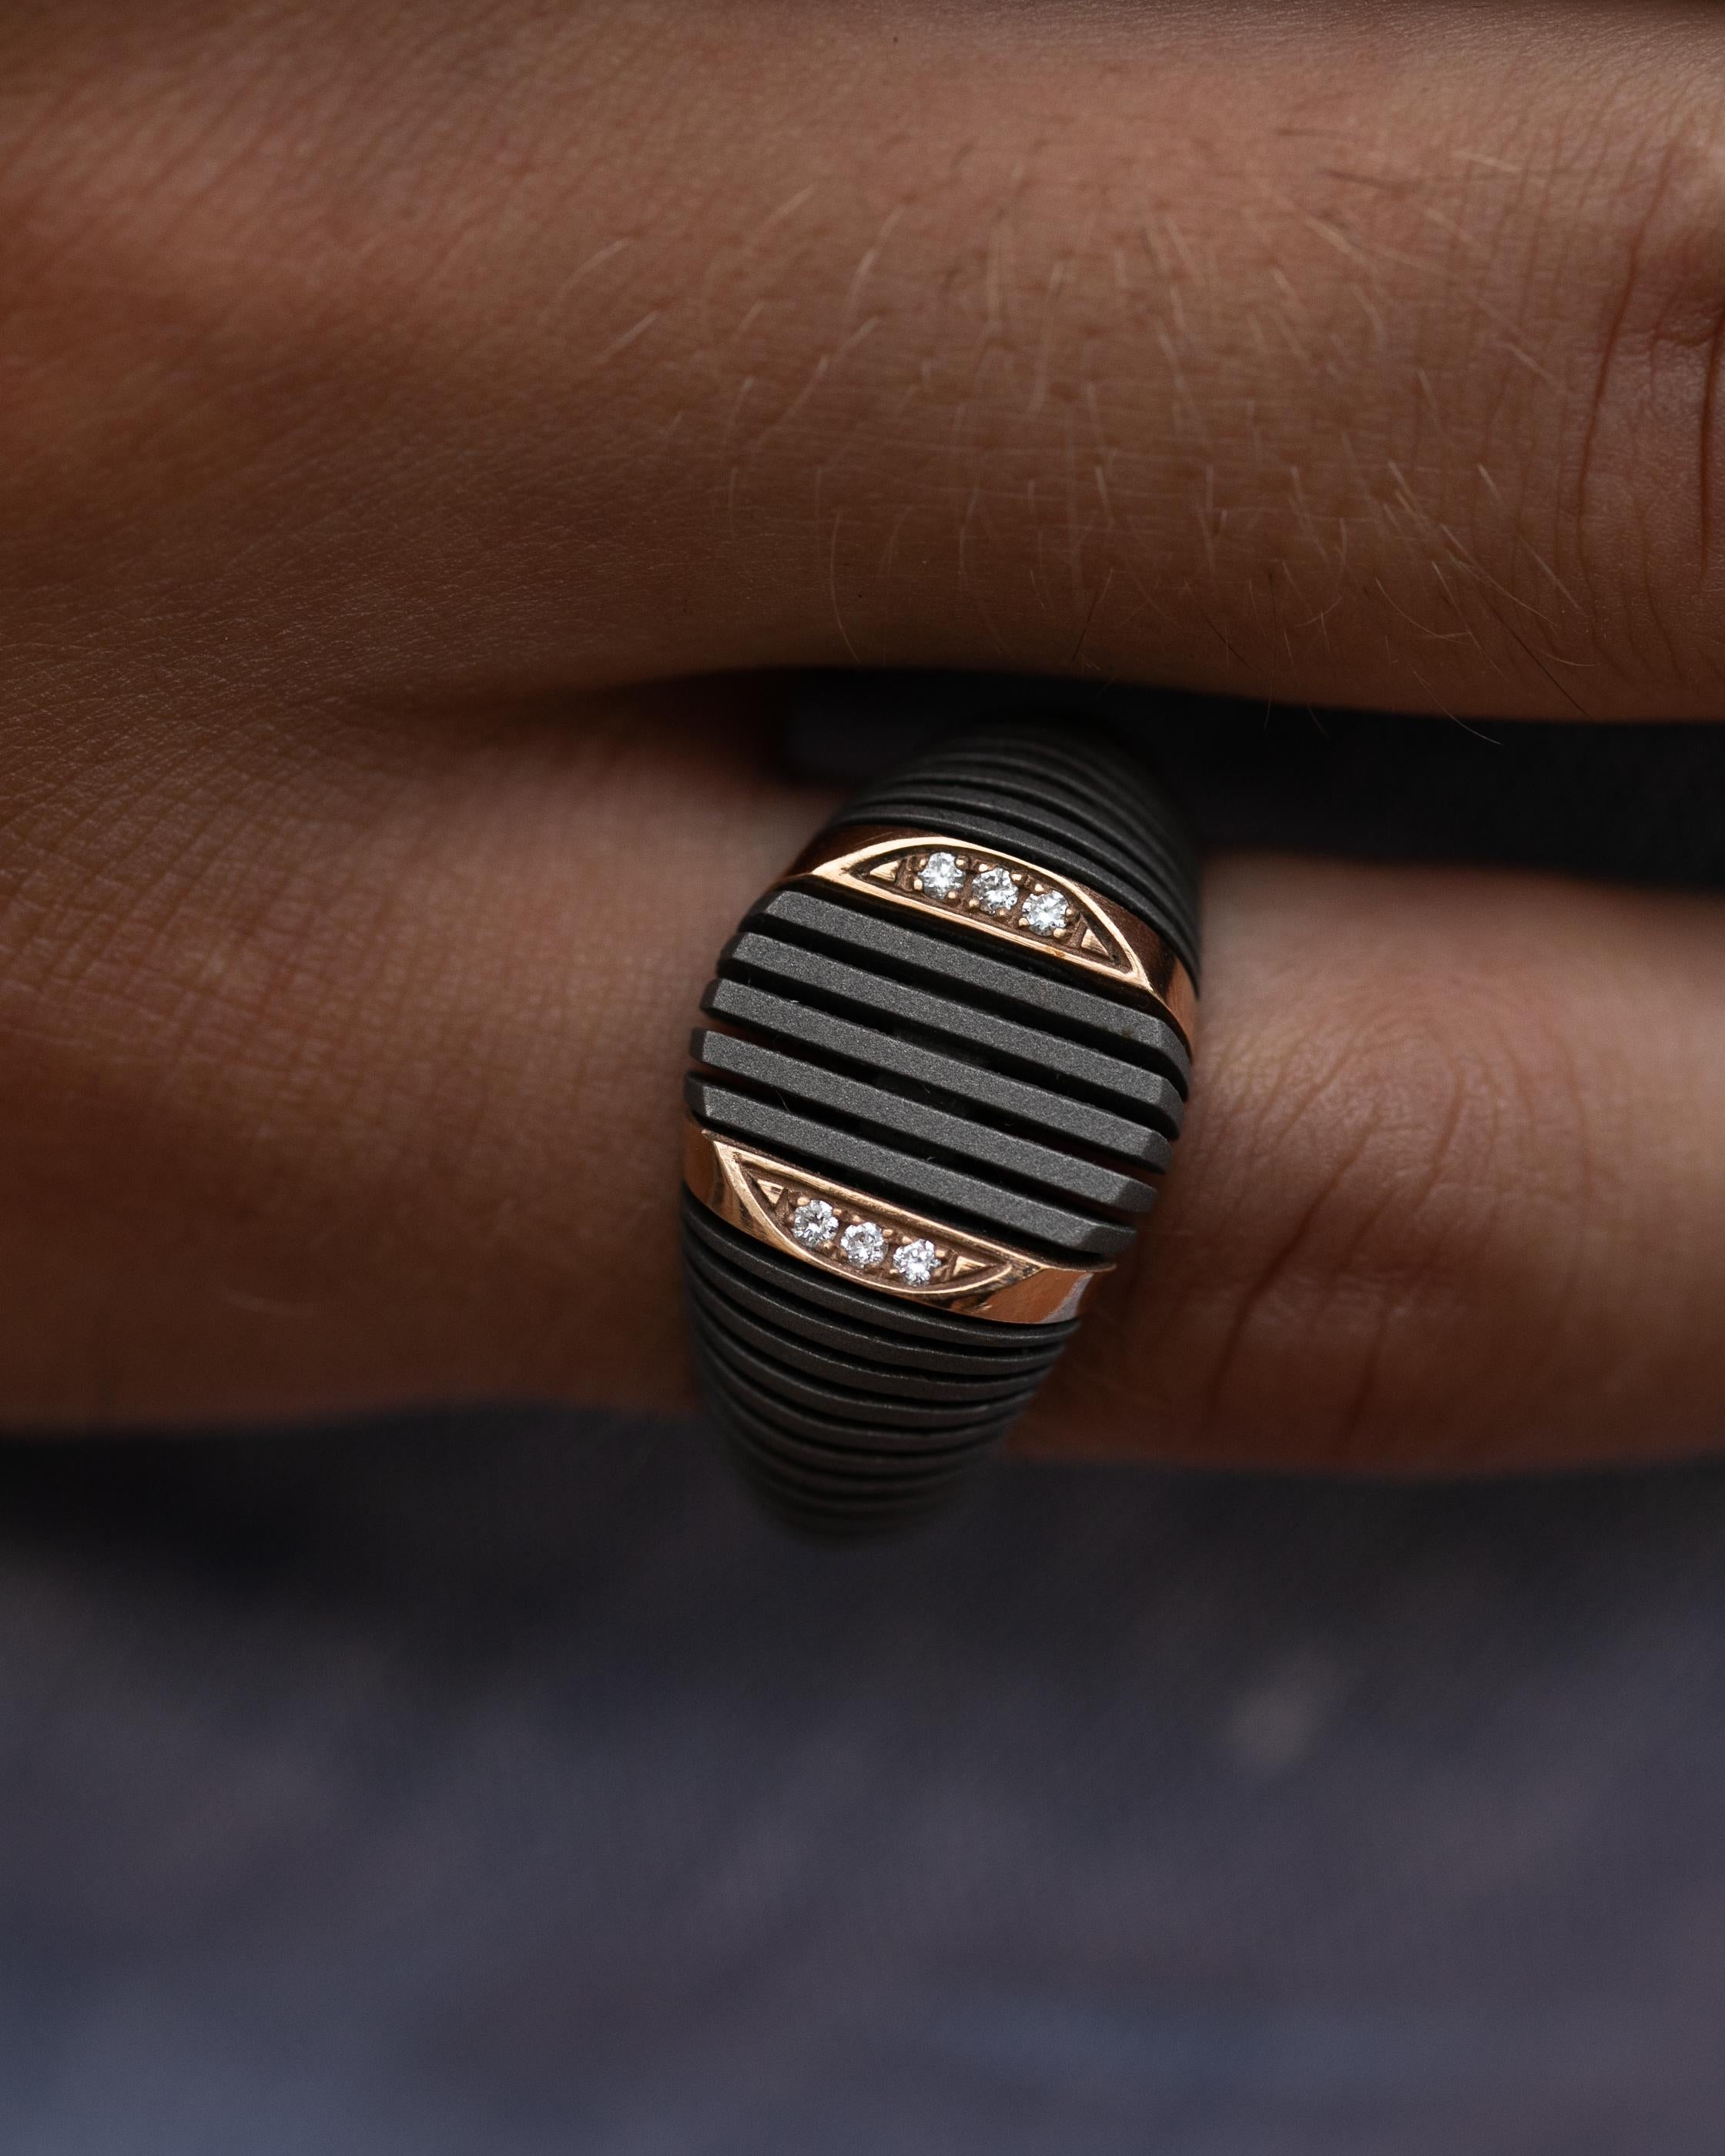 Titanium signet ring is from our Men's Collection. This masculine ring is made of 6 natural colorless round diamonds in total of 0.06 Carat placed on 18K rose gold detail. The band is 1.3cm wide. Perfect for manly look!

The men’s collection is a